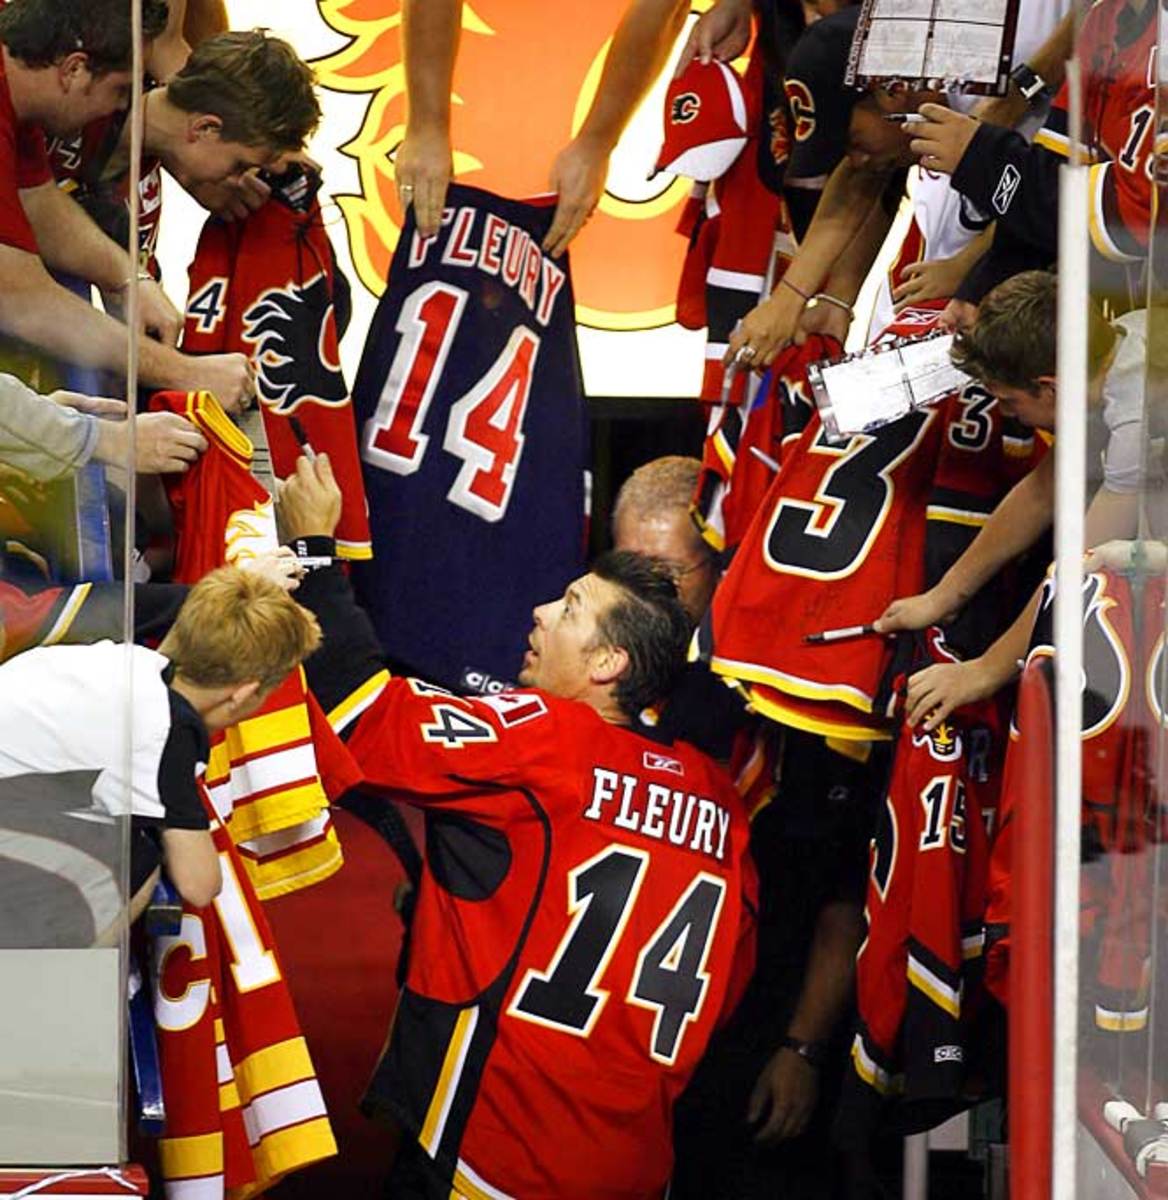 Flames Best #14 Of All Time: Theo Fleury - Matchsticks and Gasoline